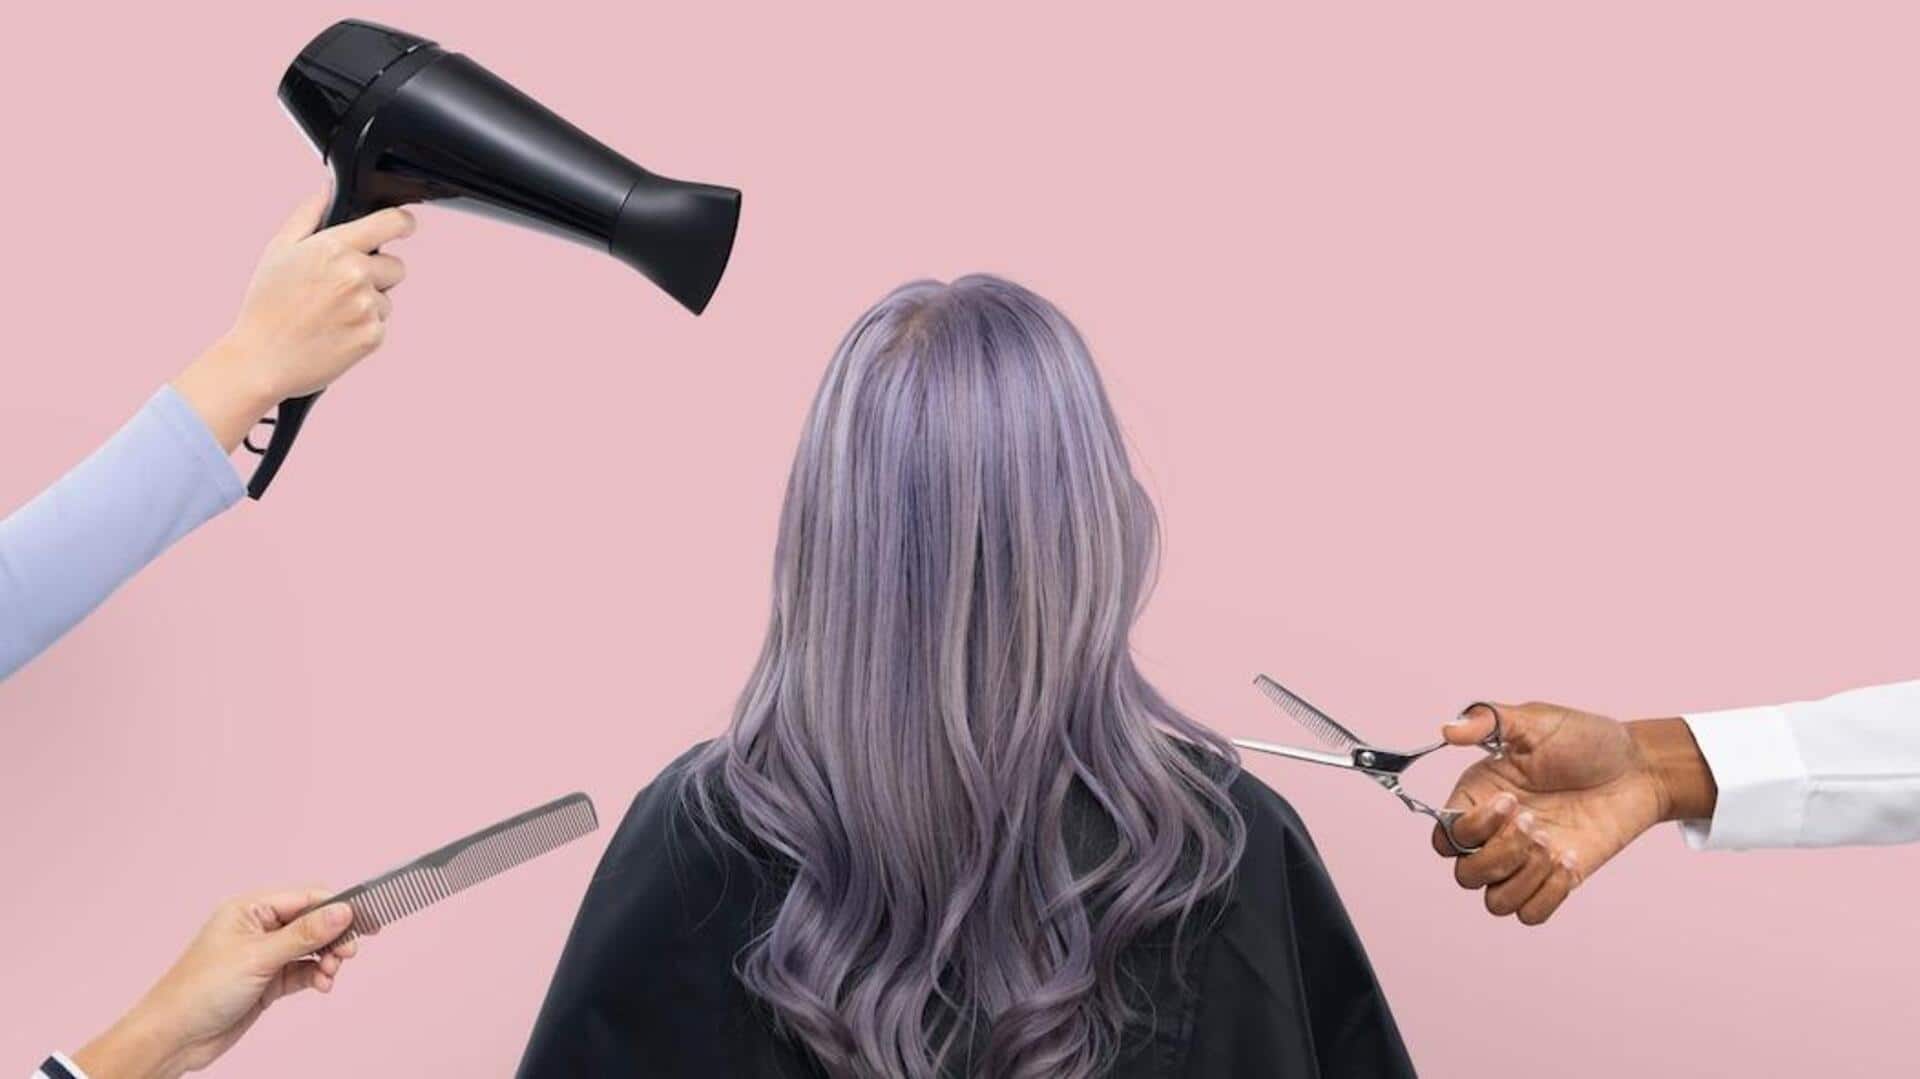 Coloring your hair? Here's what you should understand